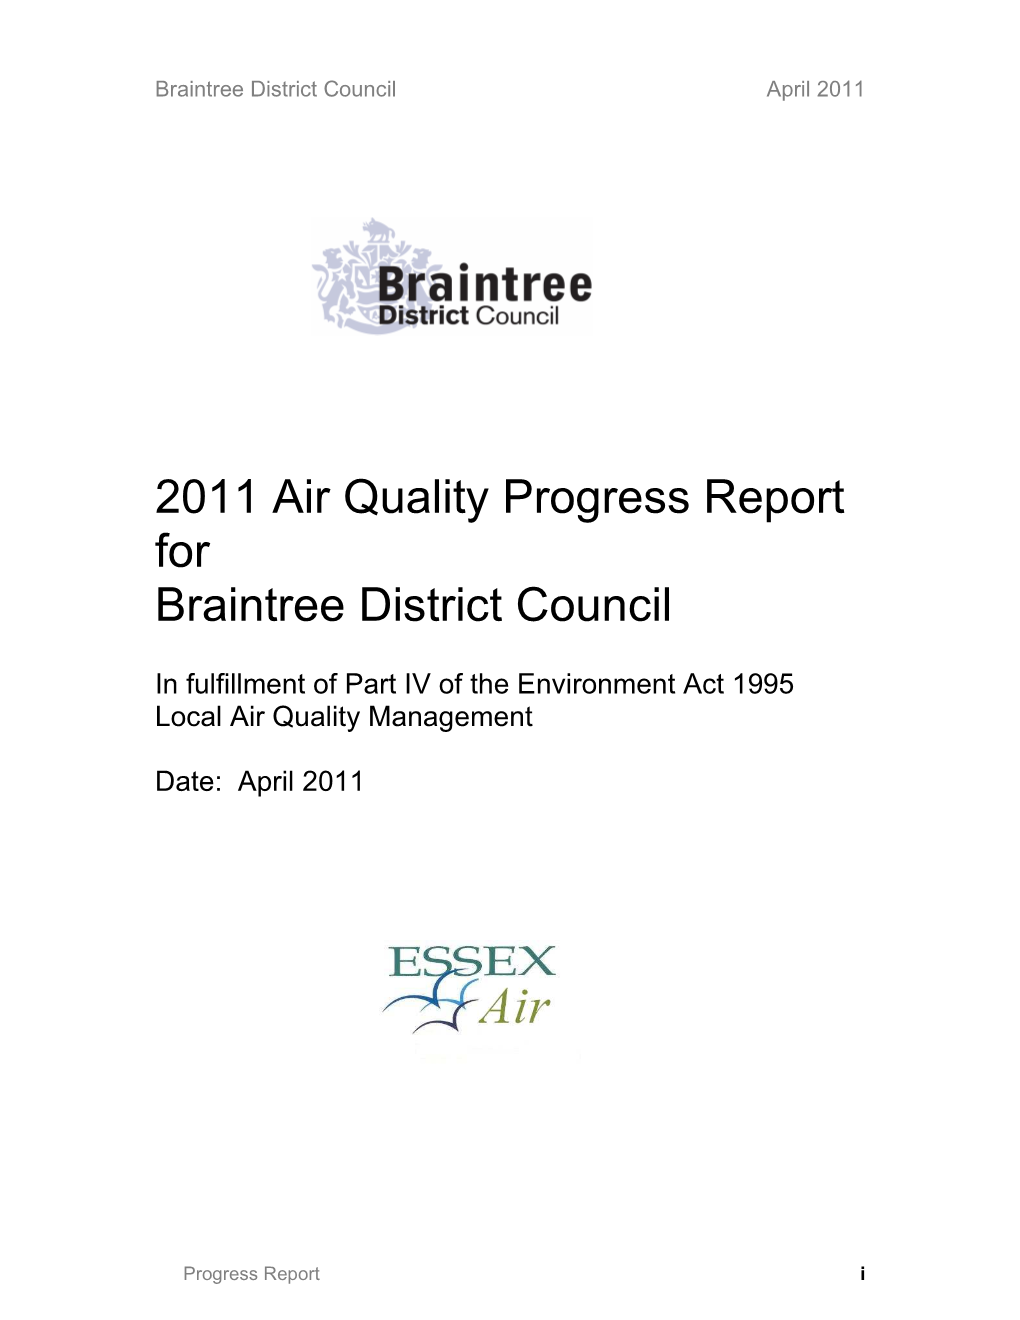 2011 Air Quality Progress Report for Braintree District Council